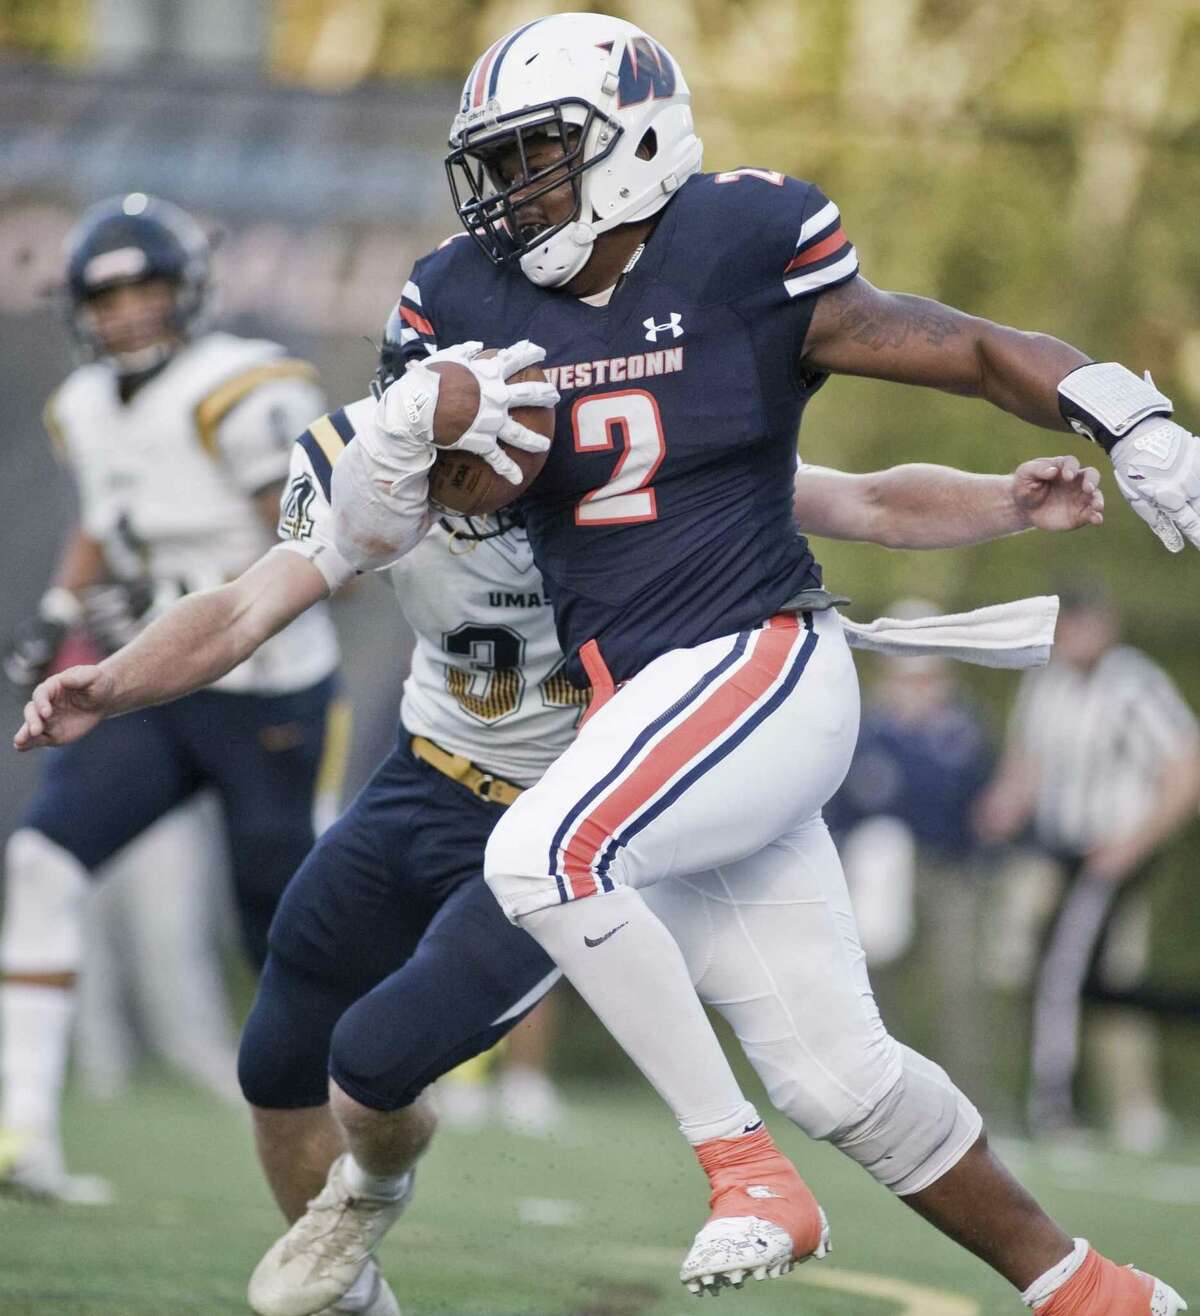 WestConn's Kyle McKinnon carries the ball in a game against UMass-Dartmouth, played at WestConn. Saturday, Sept. 29, 2018